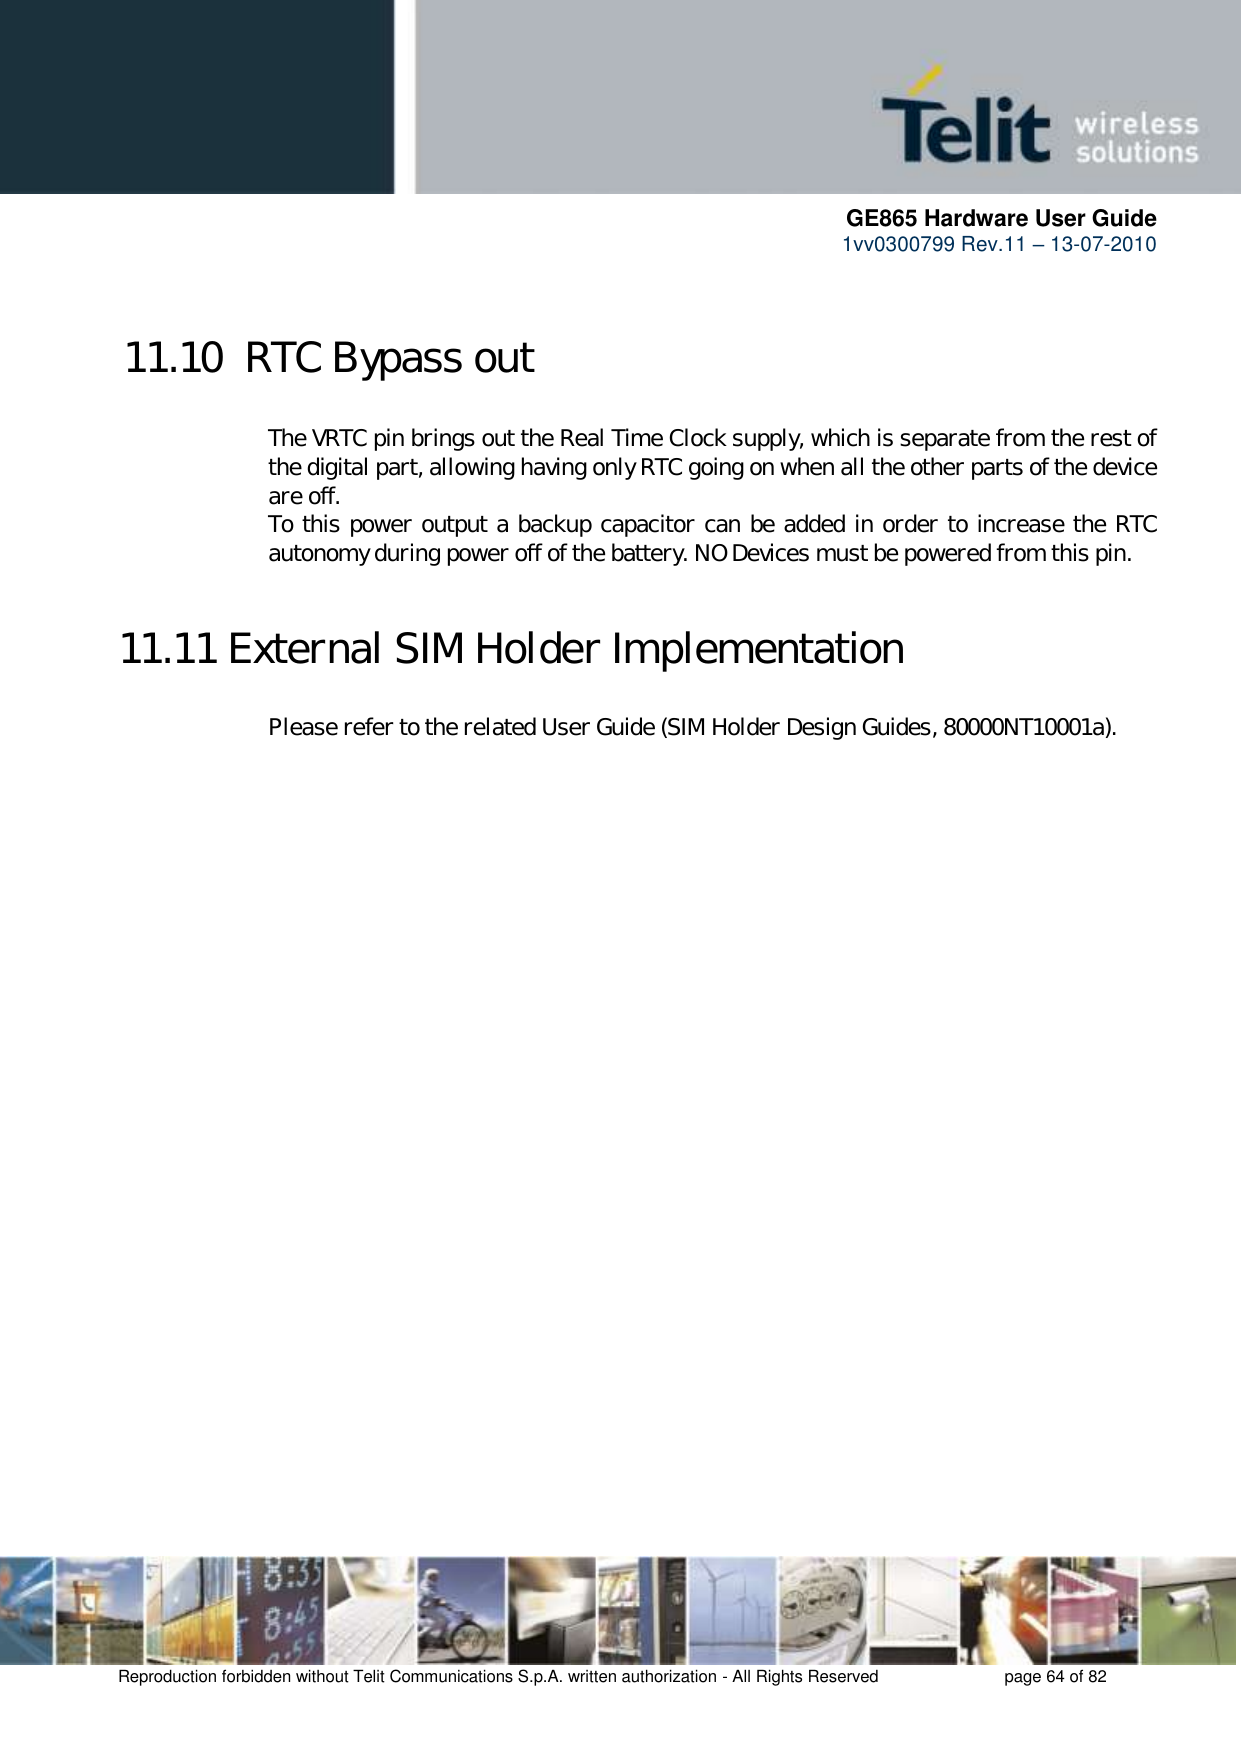      GE865 Hardware User Guide 1vv0300799 Rev.11 – 13-07-2010       Reproduction forbidden without Telit Communications S.p.A. written authorization - All Rights Reserved    page 64 of 82  11.10  RTC Bypass out  The VRTC pin brings out the Real Time Clock supply, which is separate from the rest of the digital part, allowing having only RTC going on when all the other parts of the device are off. To this power output a backup capacitor can be added in order to increase the RTC autonomy during power off of the battery. NO Devices must be powered from this pin.  11.11 External SIM Holder Implementation Please refer to the related User Guide (SIM Holder Design Guides, 80000NT10001a).  